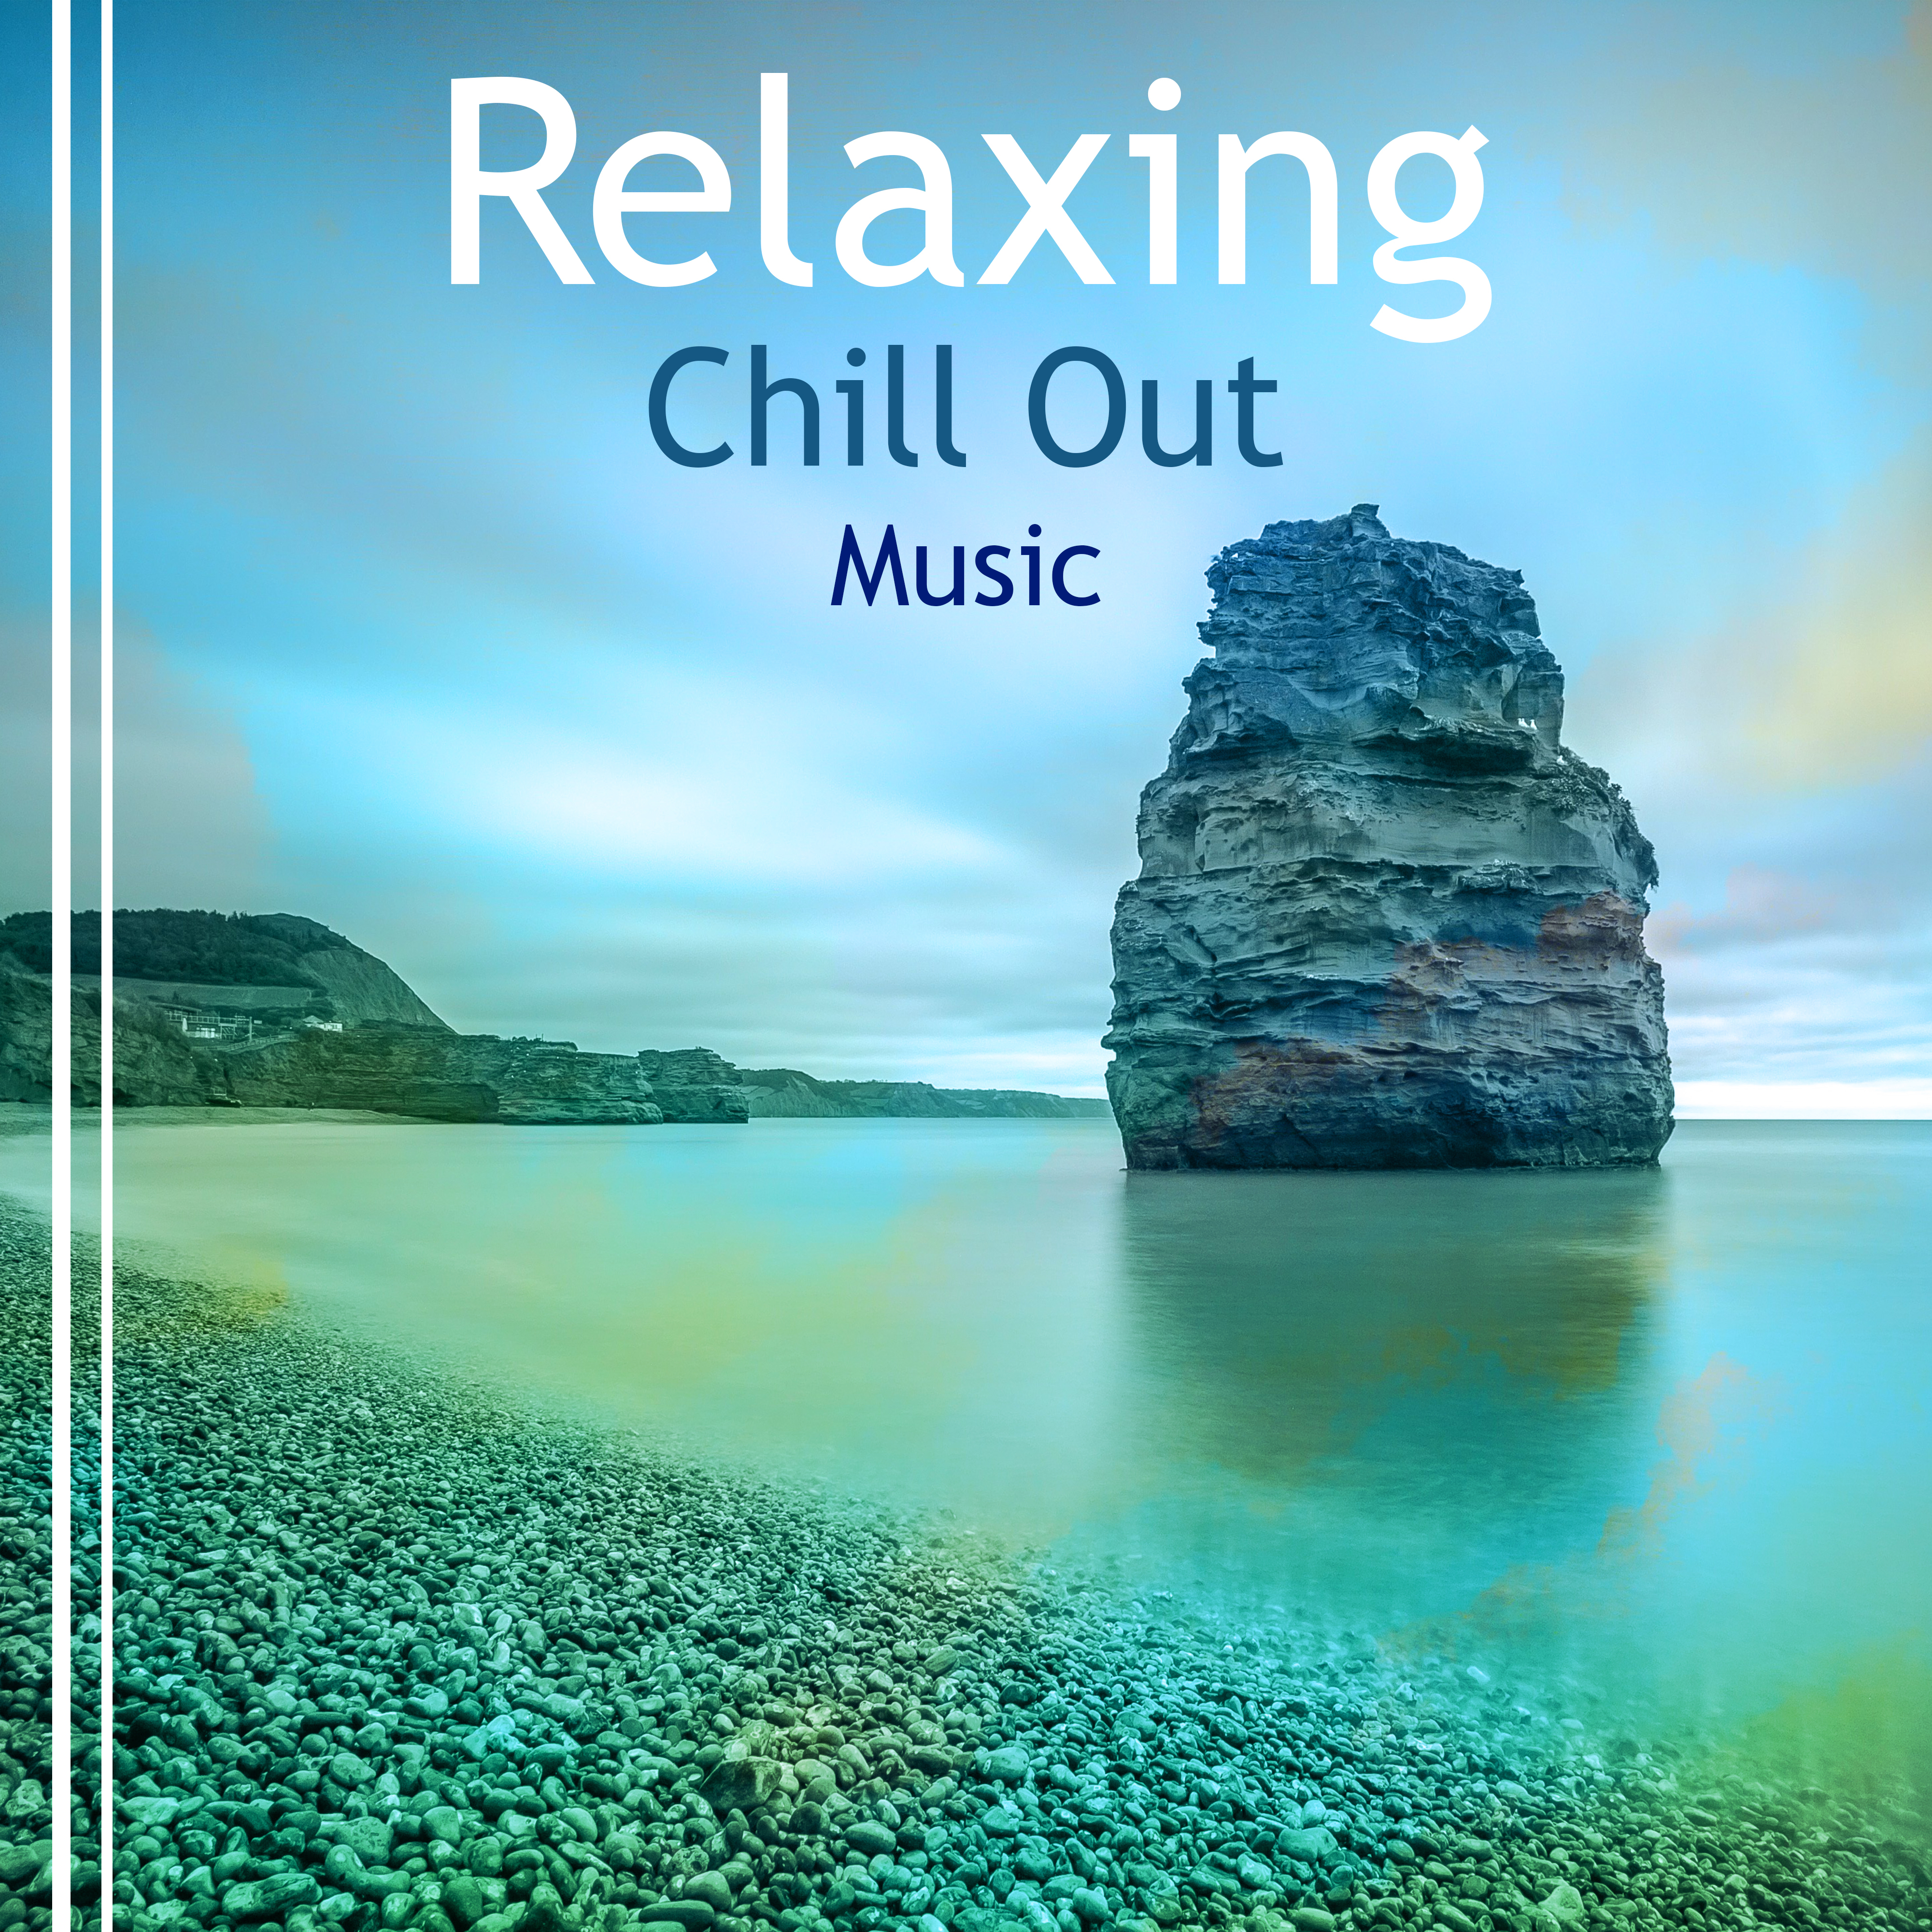 Relaxing Chill Out Music  Beach Relaxation, Sounds to Calm Down, Summer Vibes, Tropical Island